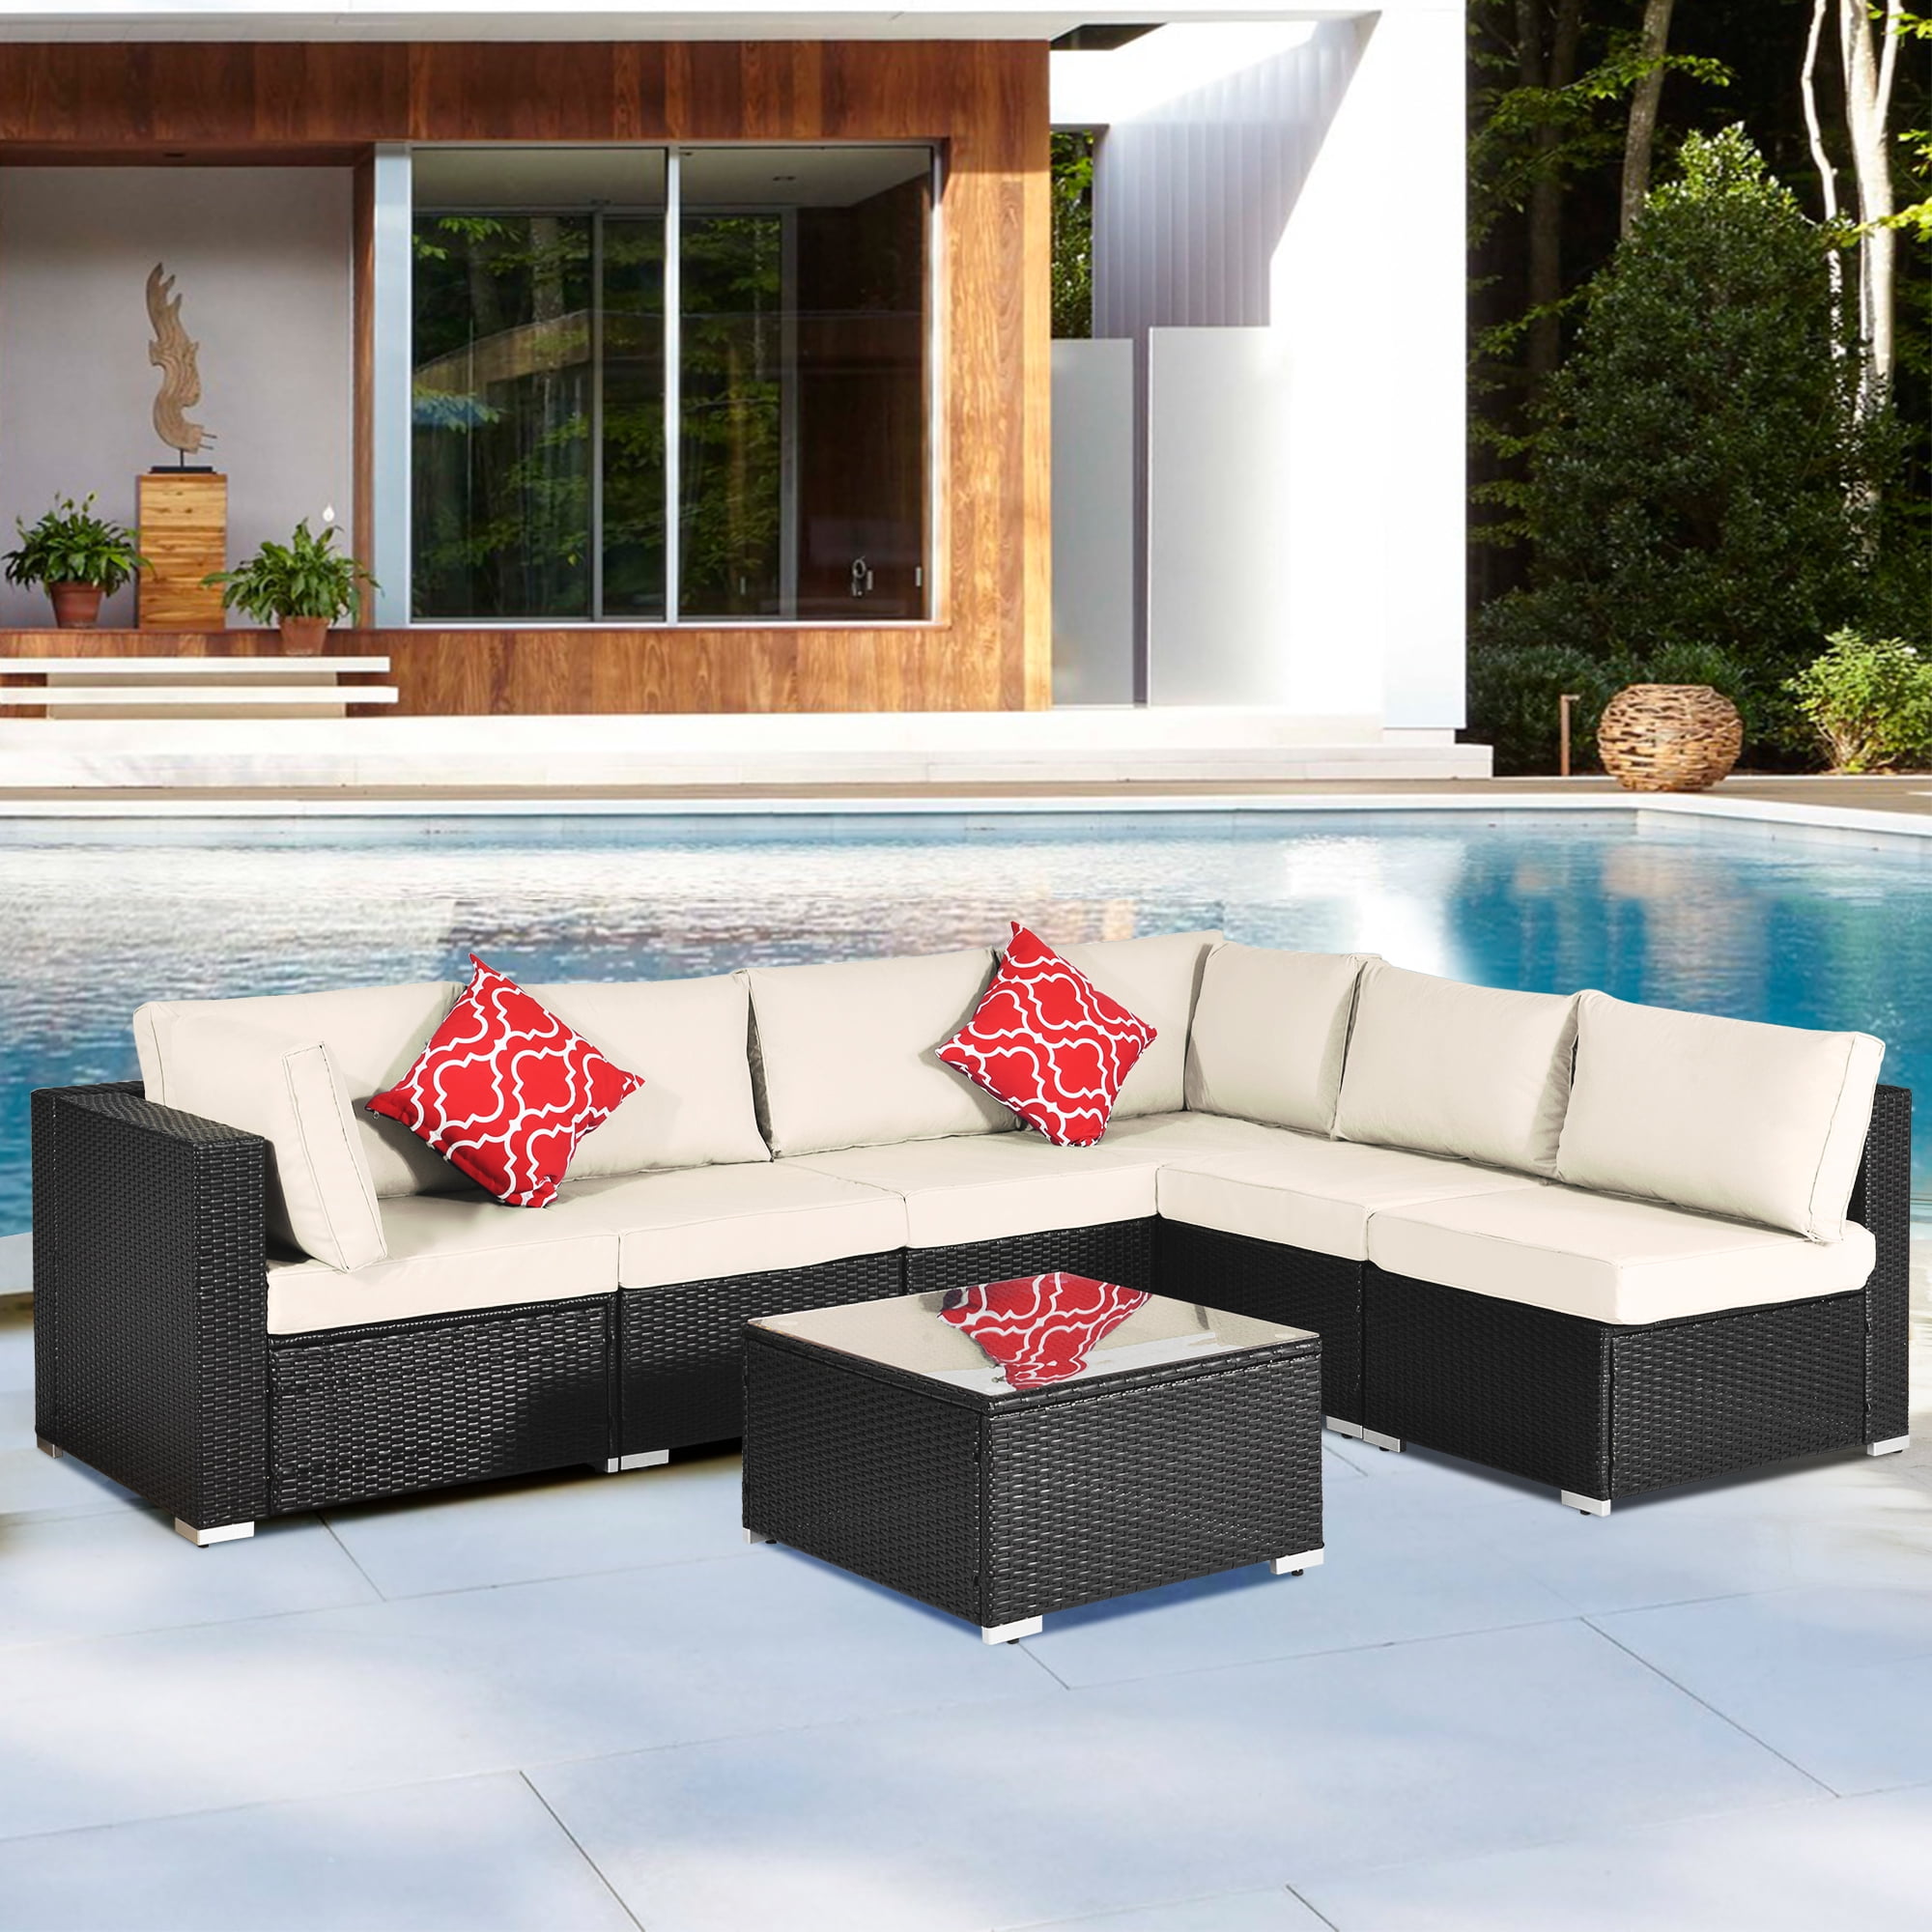 Outdoor Wicker Patio Furniture Sets 6 Pieces Modern Porch Conversation Furniture Lawn with Glass Coffee Table,Front Porch Furniture PE Rattan Sofa with Chairs,Suitable for Garden Lawn Backyard Pool 